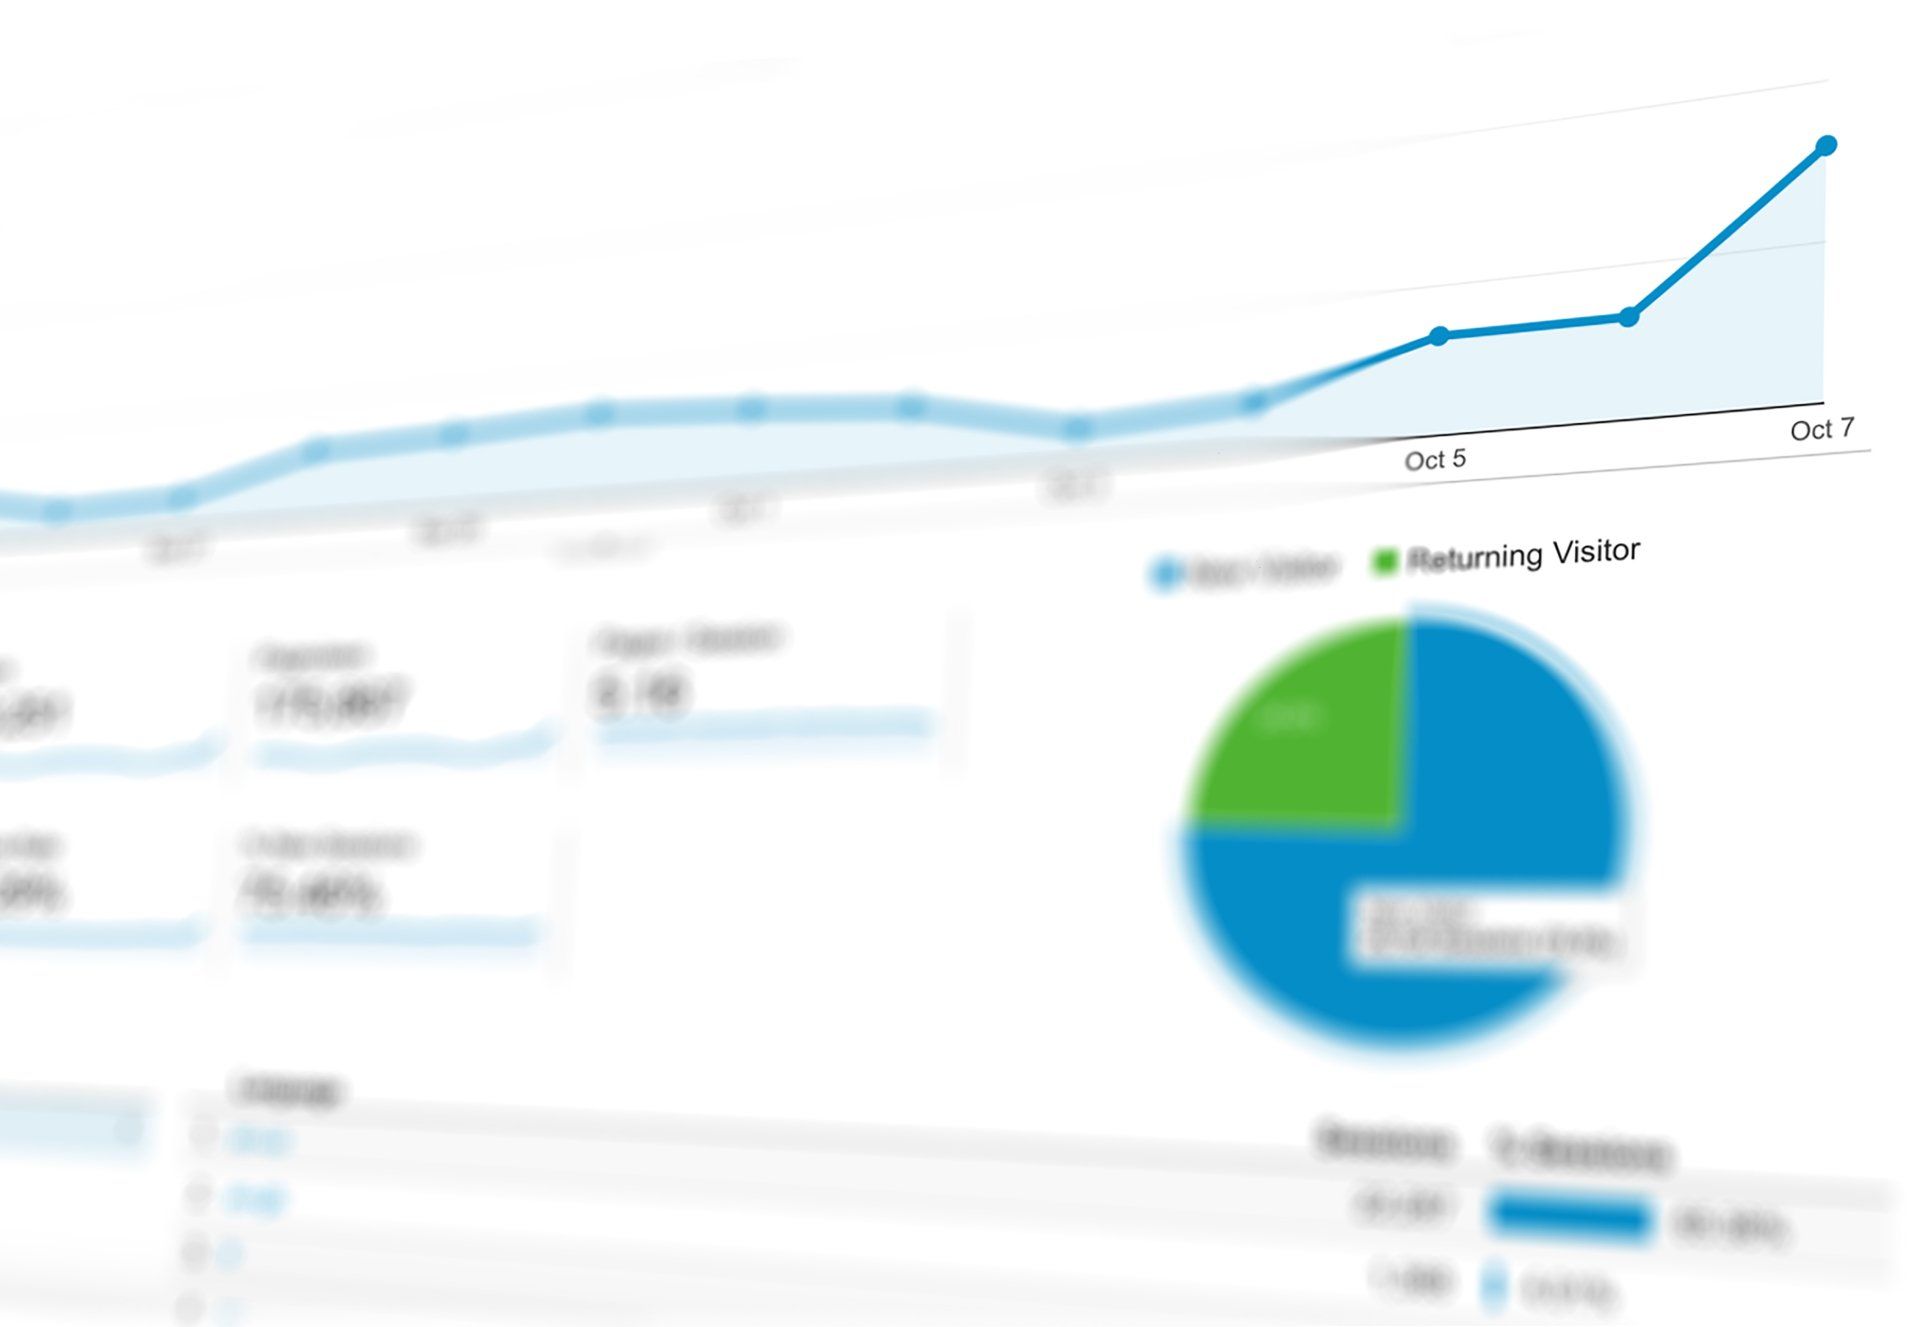 Google analytics image in a blog about SEO by a Bournemouth SEO agency